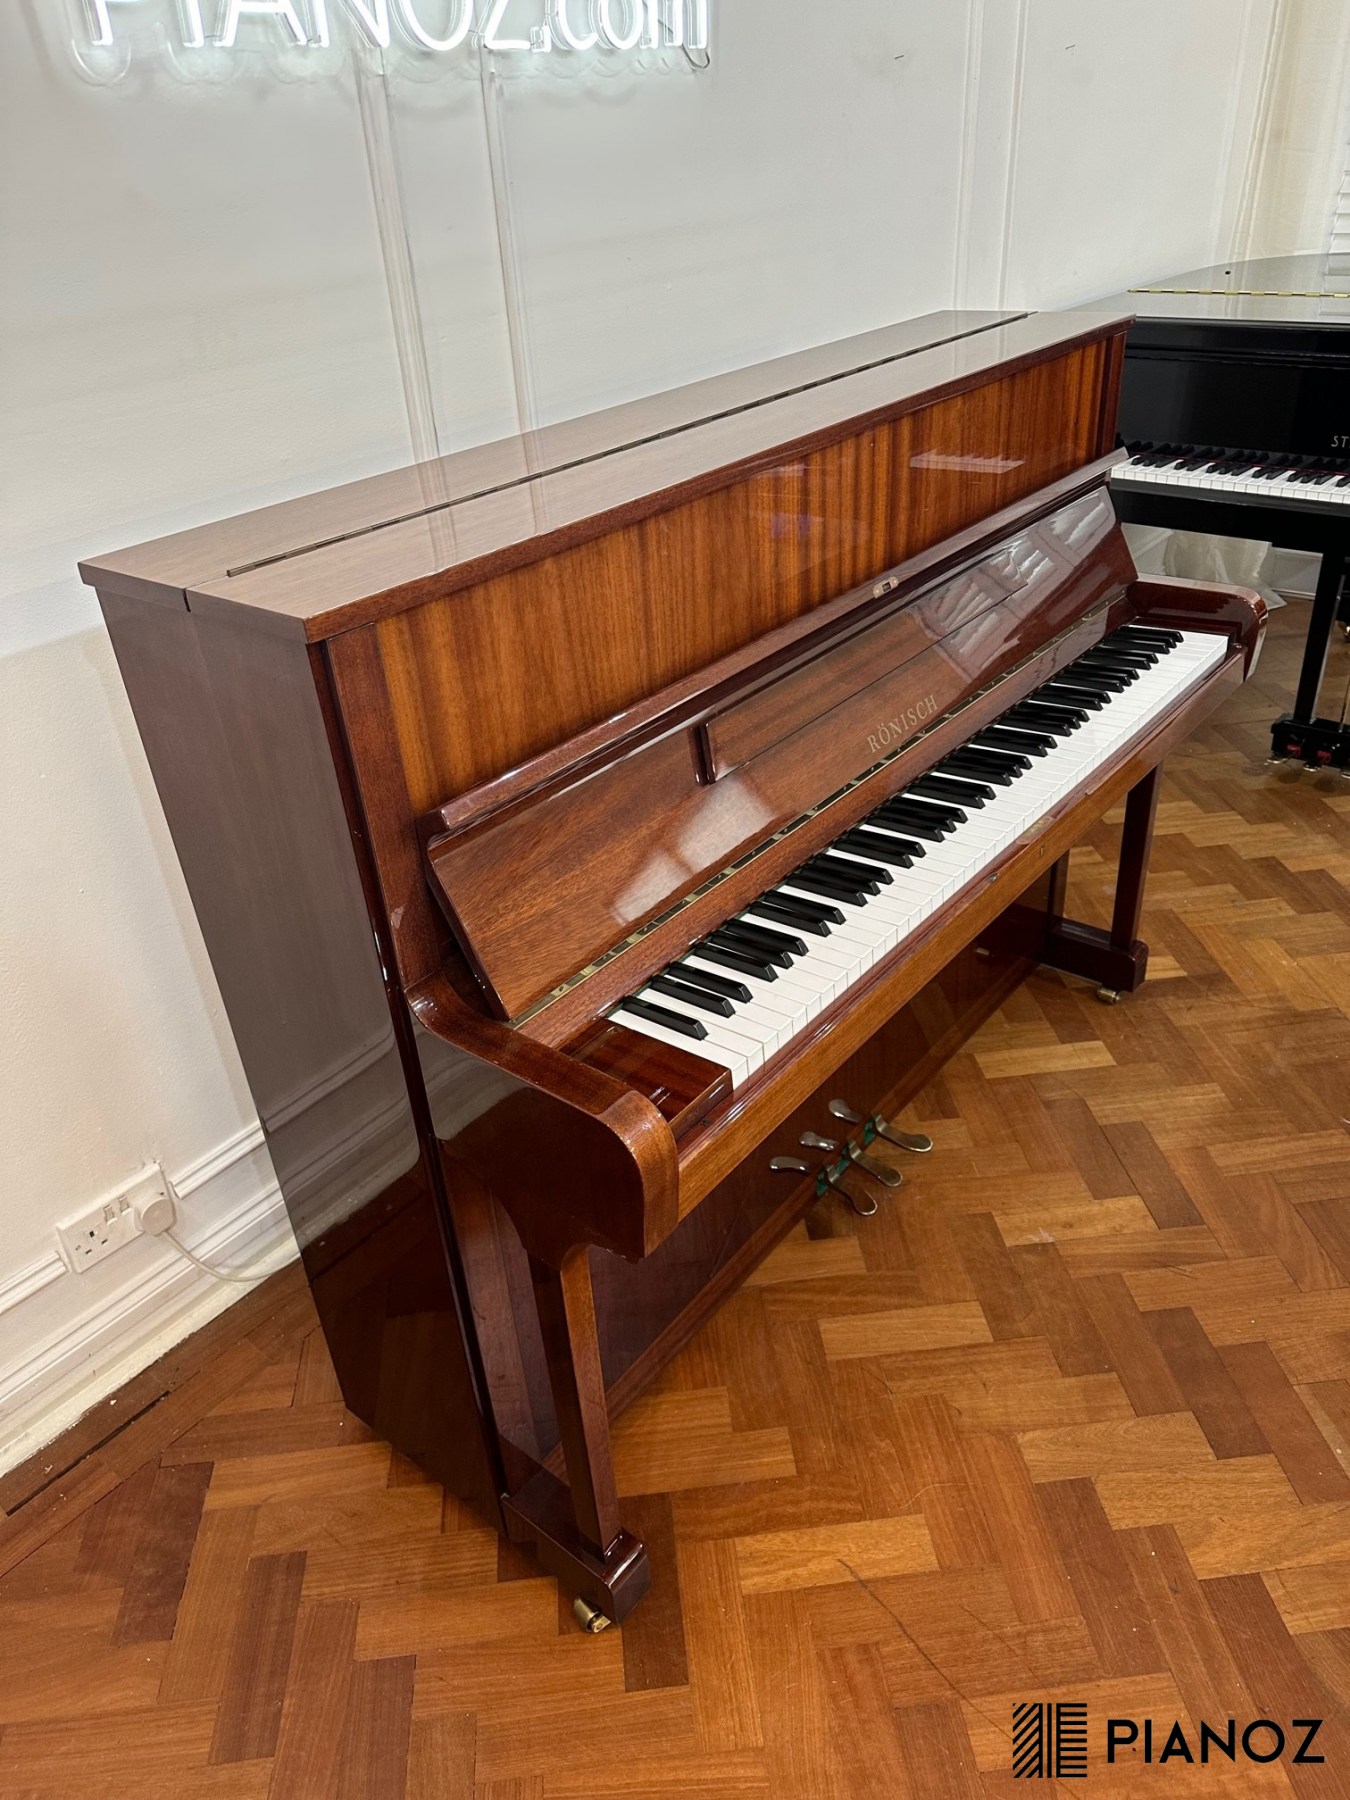 Ronisch 116 German Upright Piano piano for sale in UK